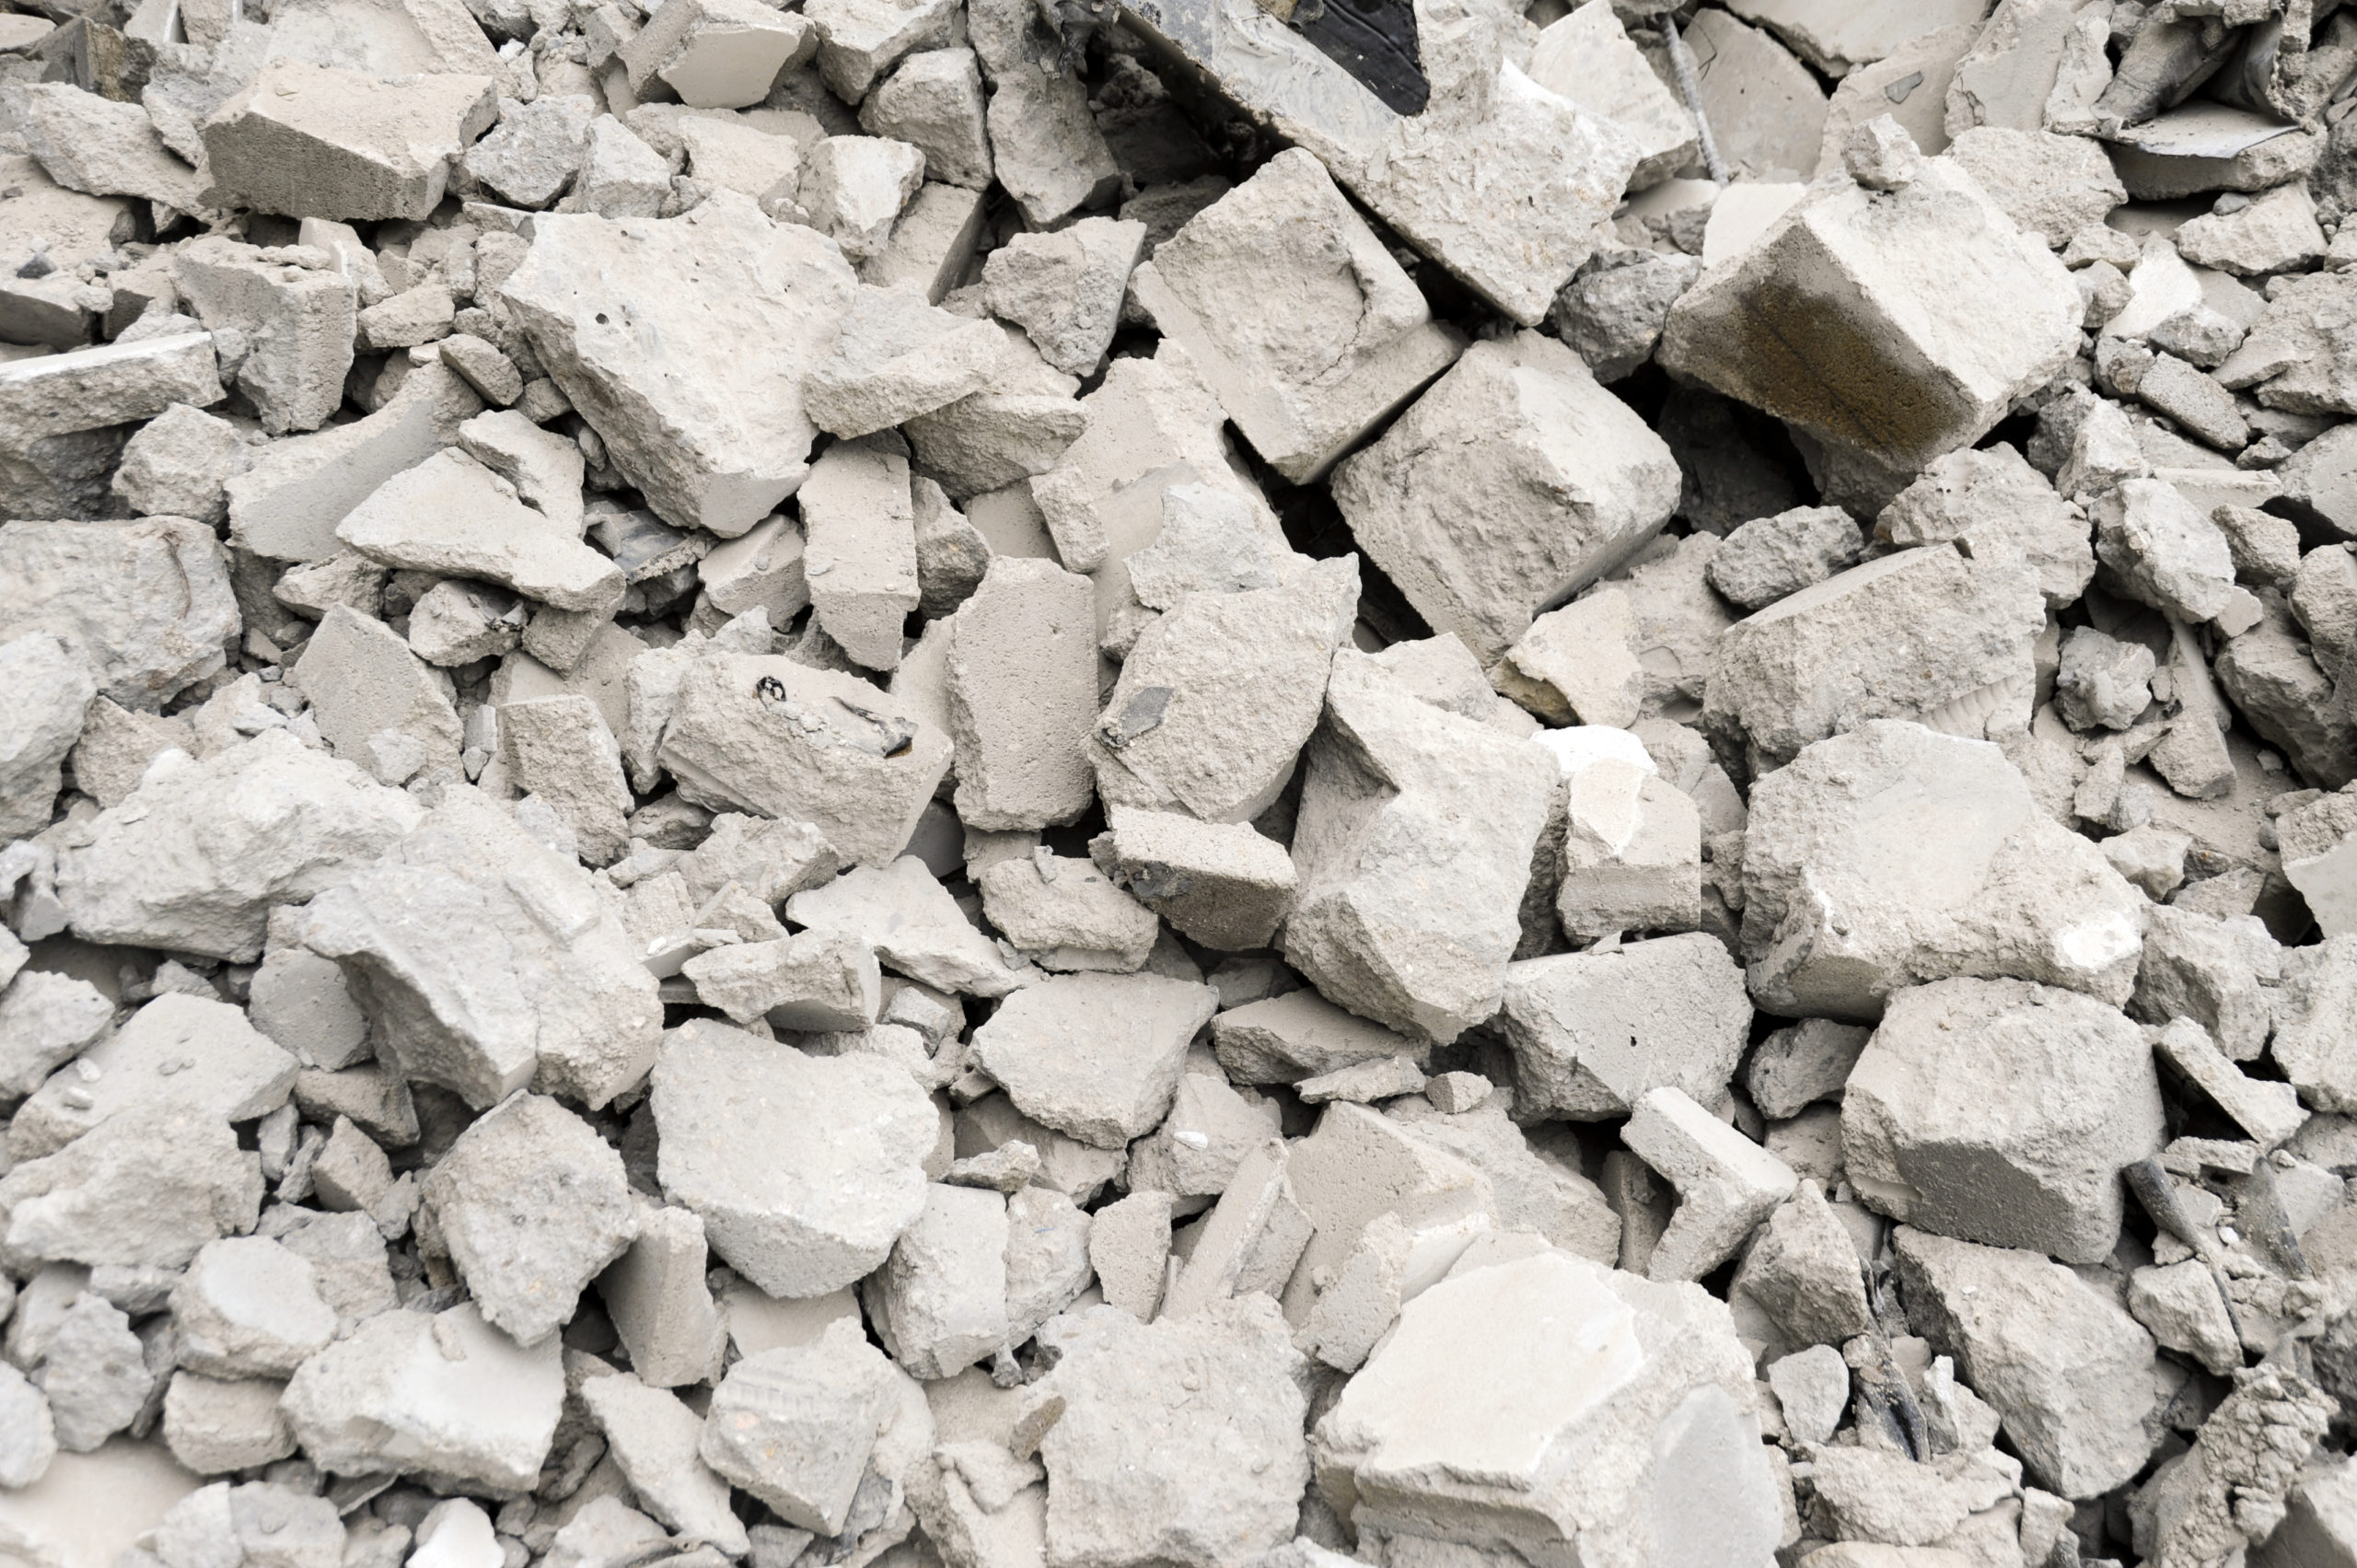 Chunks of recyclable concrete are piled together as a show of one kind of circular economy solution.